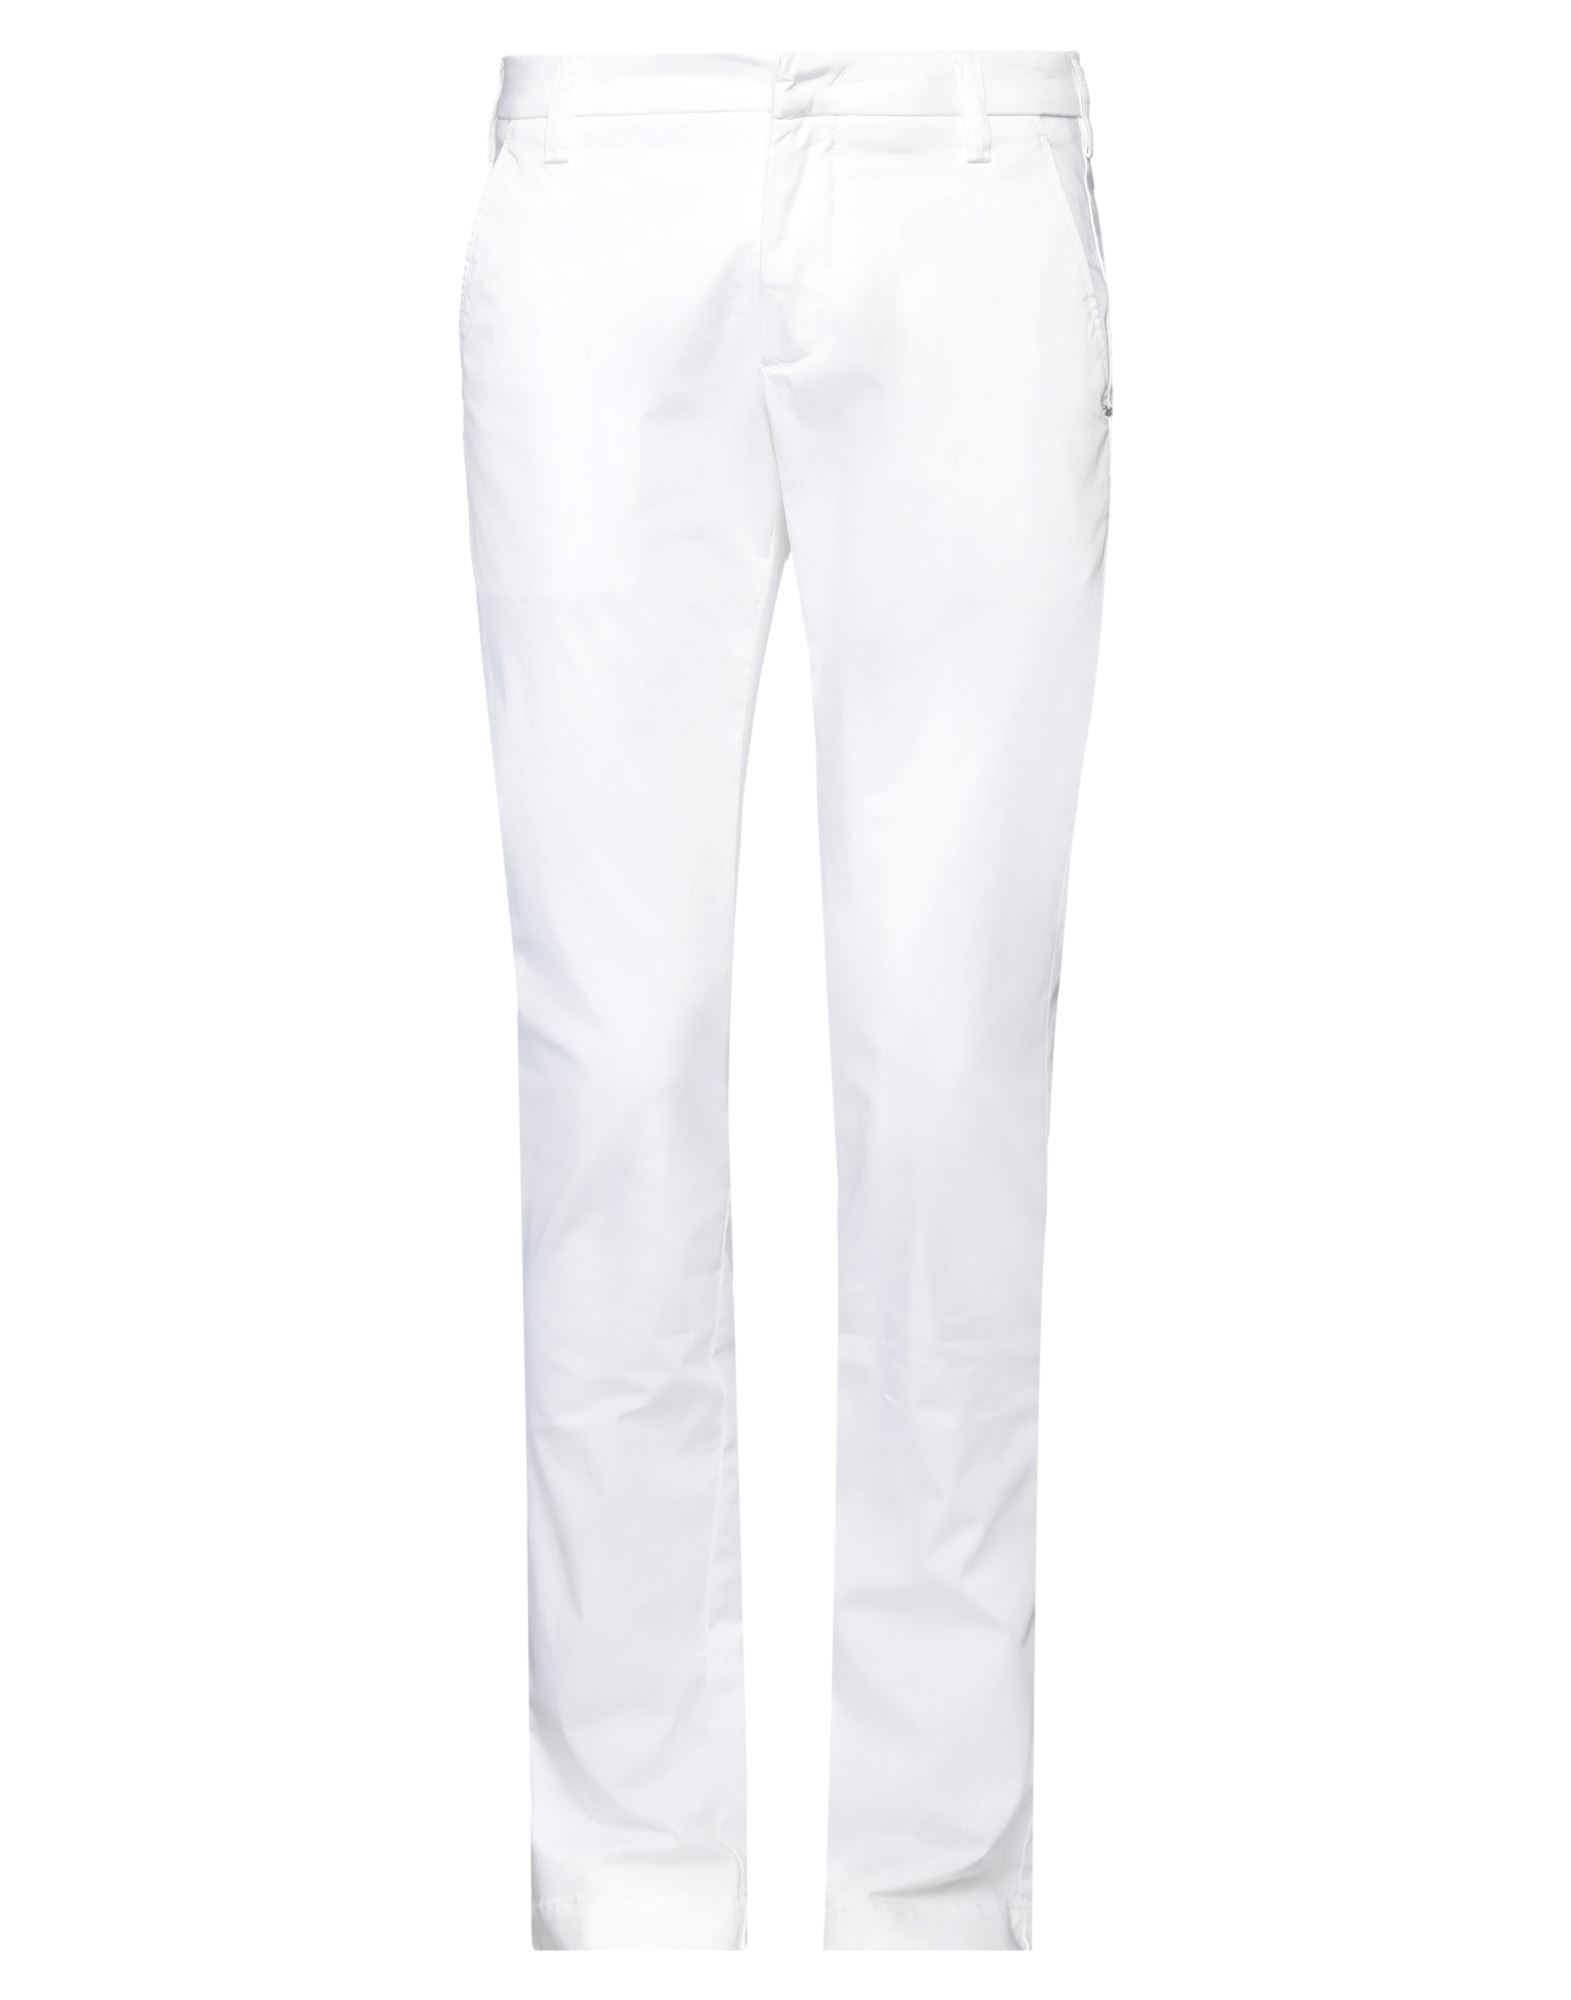 Entre Amis Pants In White